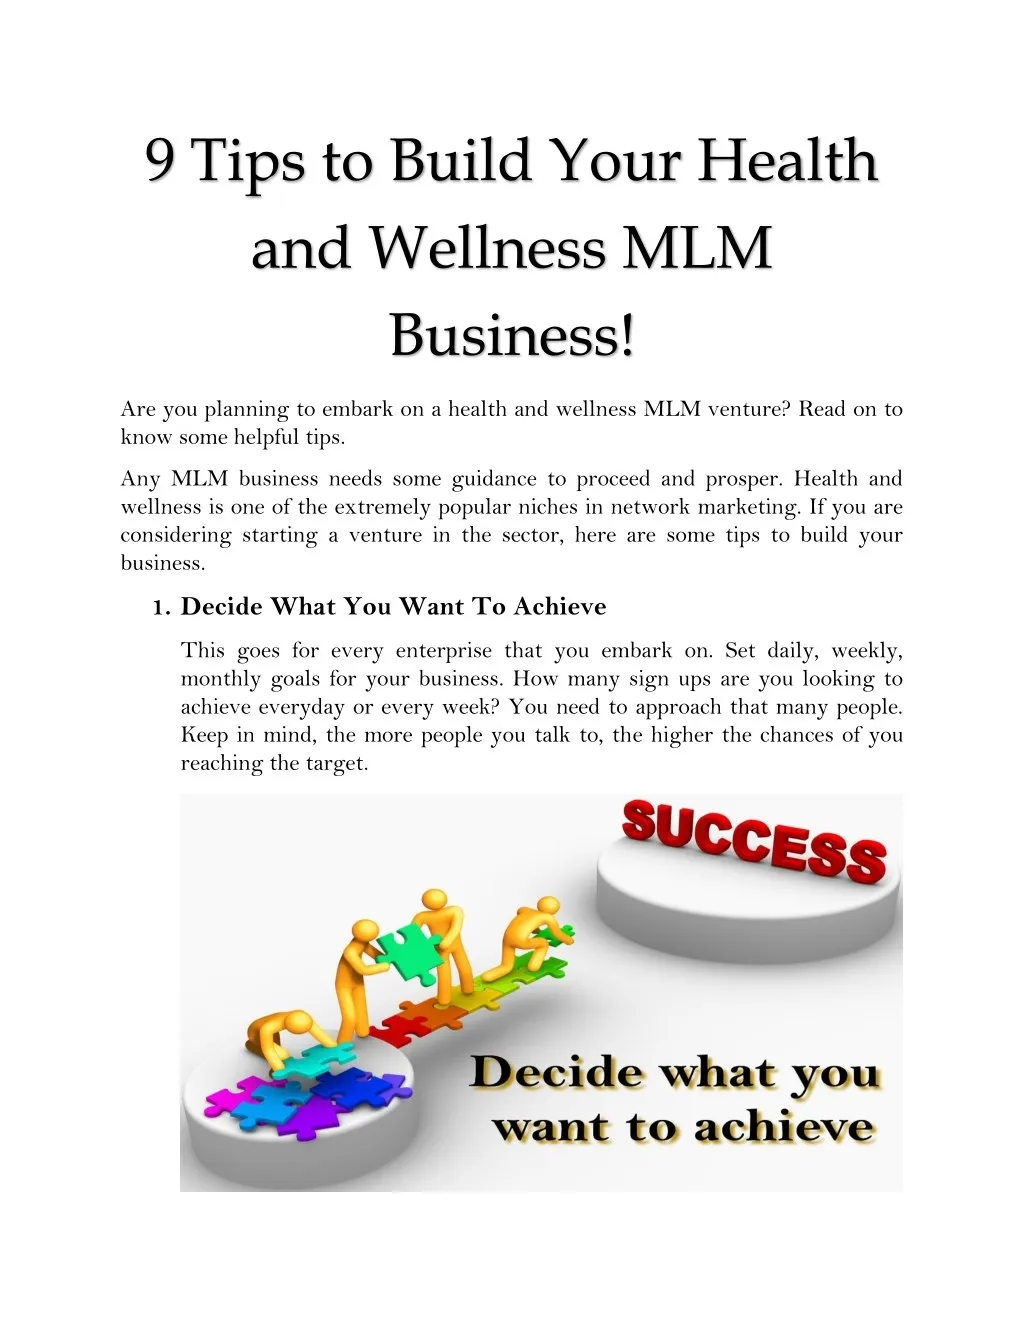 9 tips to build your health and wellness